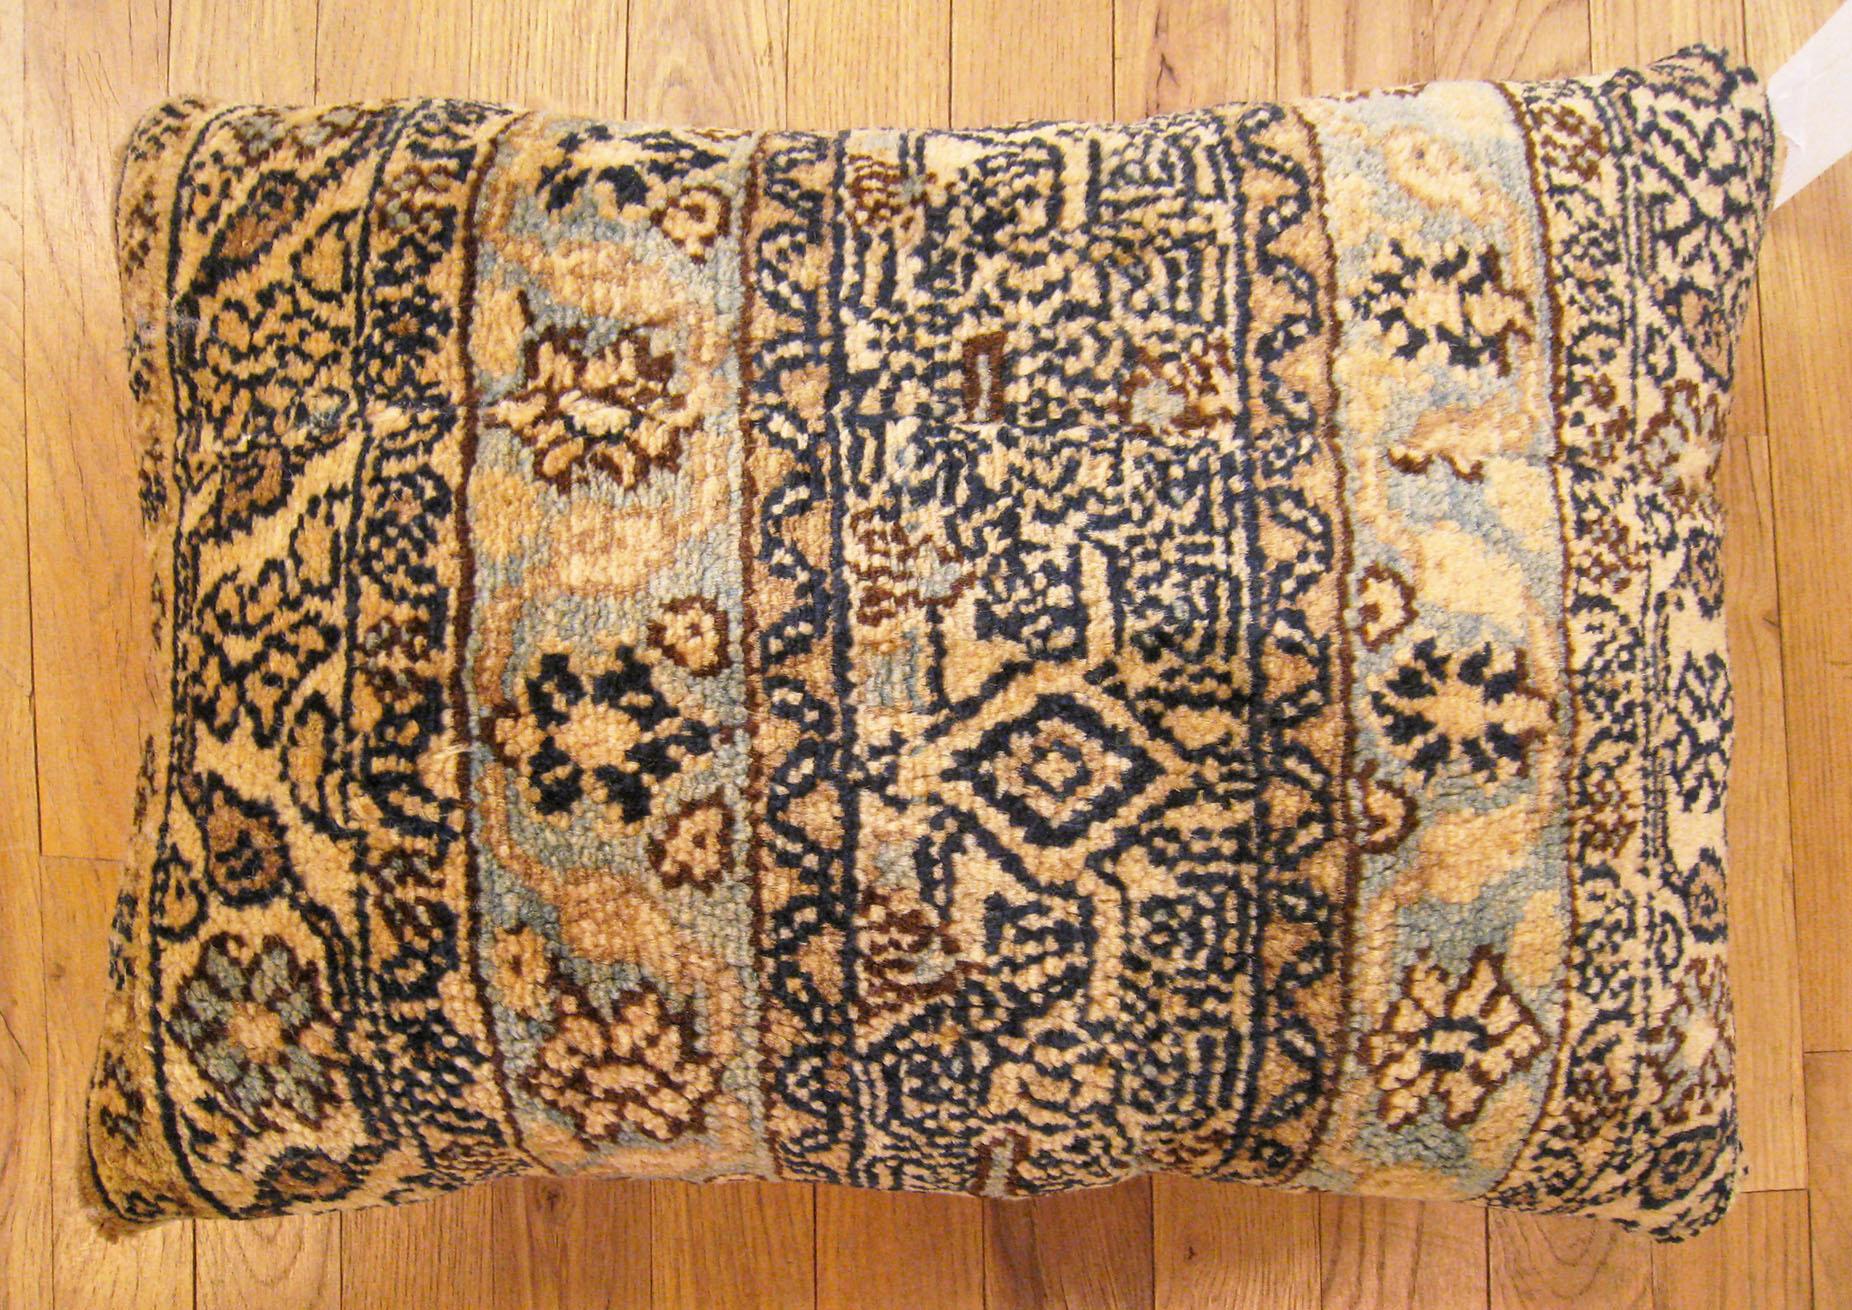 Antique Persian Hamadan Rug Pillow; size 1'10” x 1'6”.

An antique decorative pillow with floral elements allover a beige central field, size 1'10” x 1'6”. This lovely decorative pillow features an antique fabric of a Hamadan rug on front which is